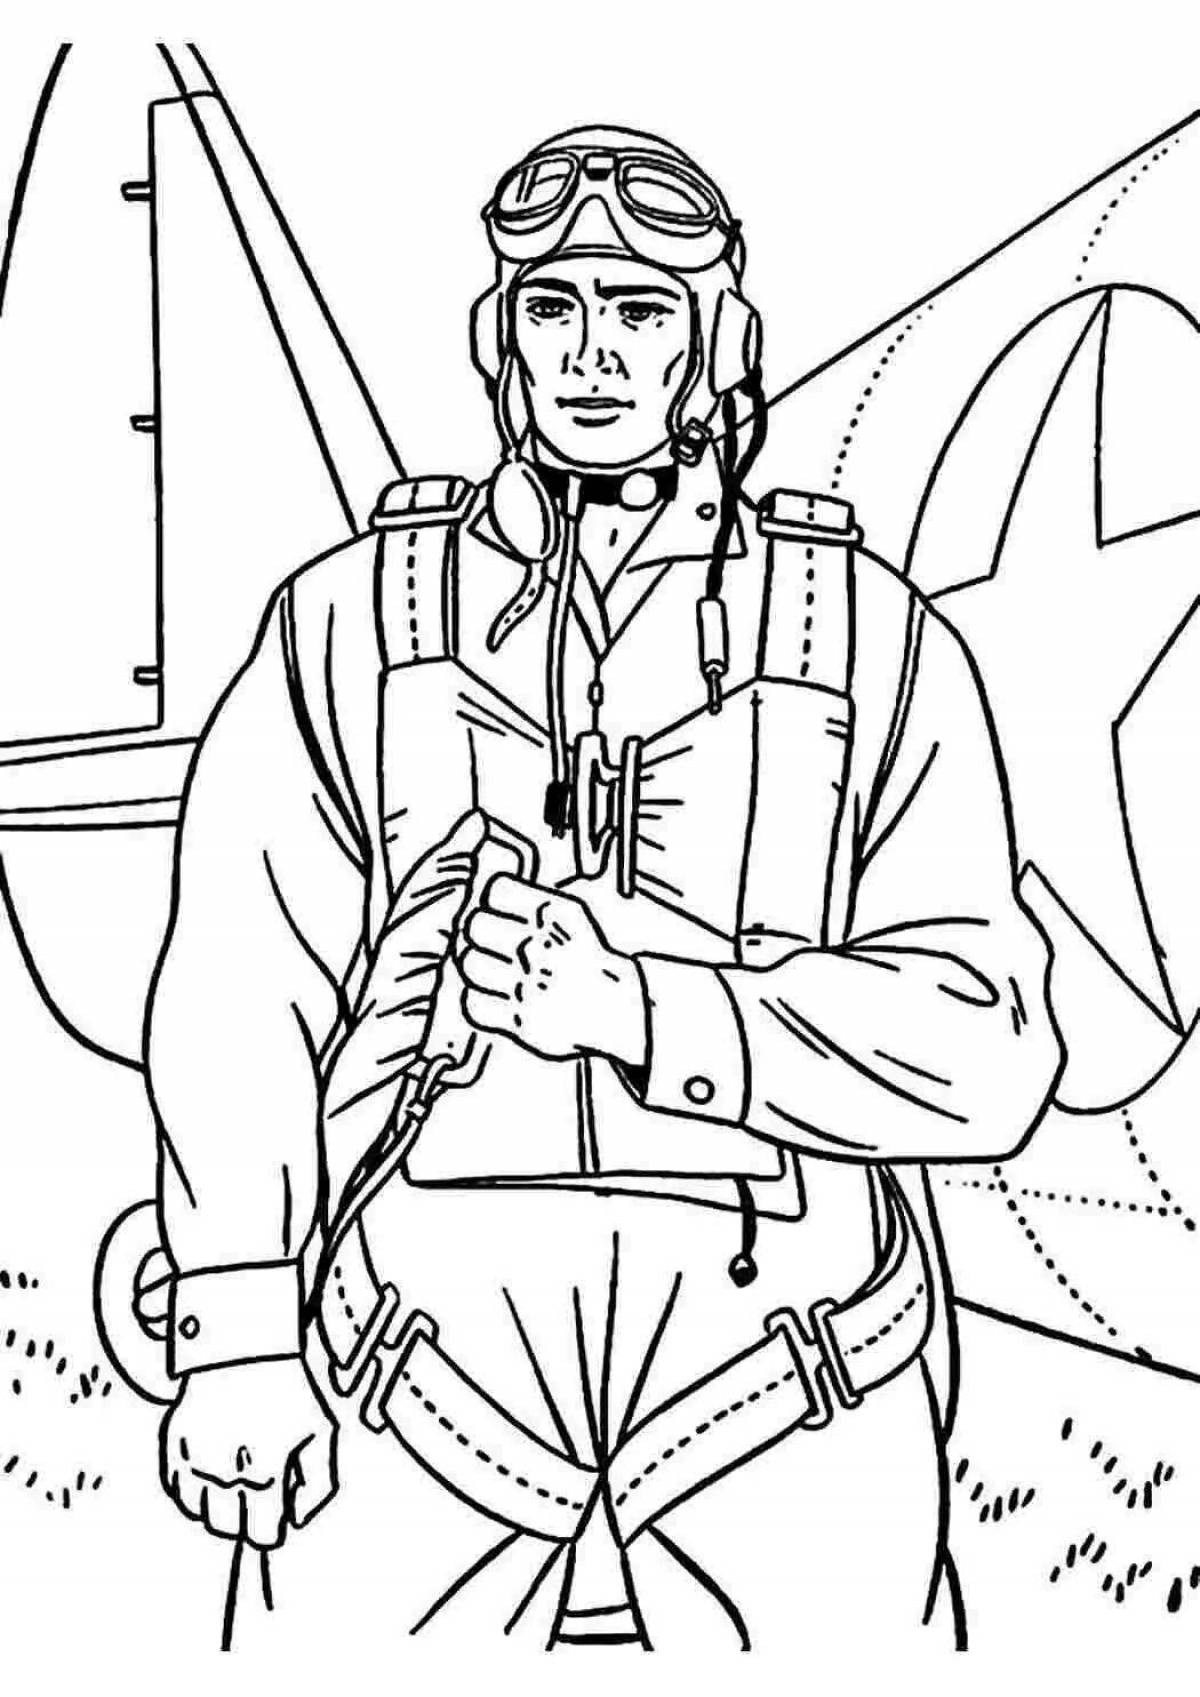 Great military profession coloring book for kids